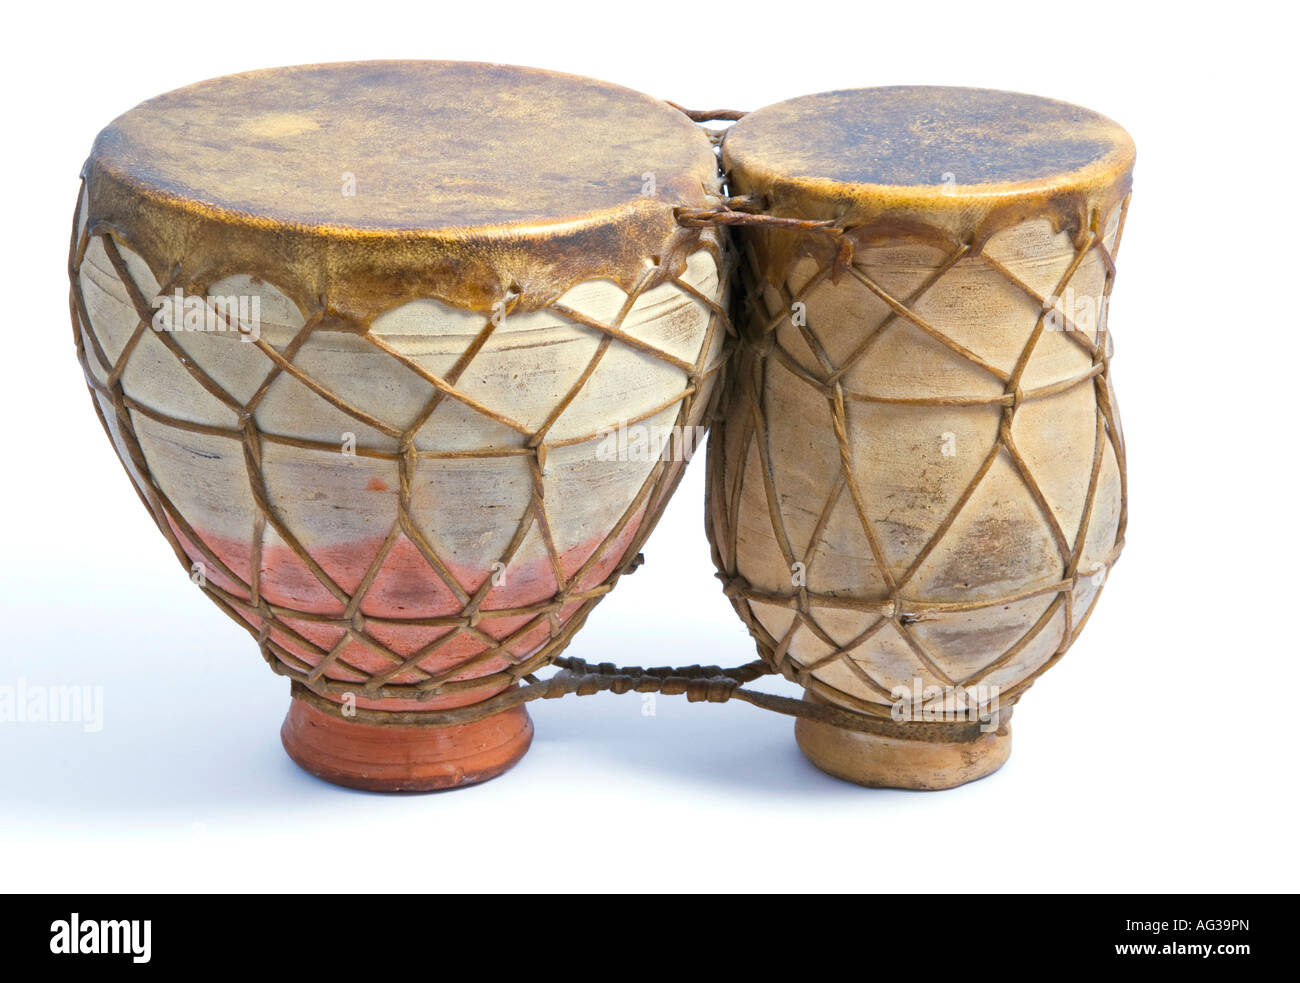 A Moroccan clay and goatskin bongo drum Stock Photo